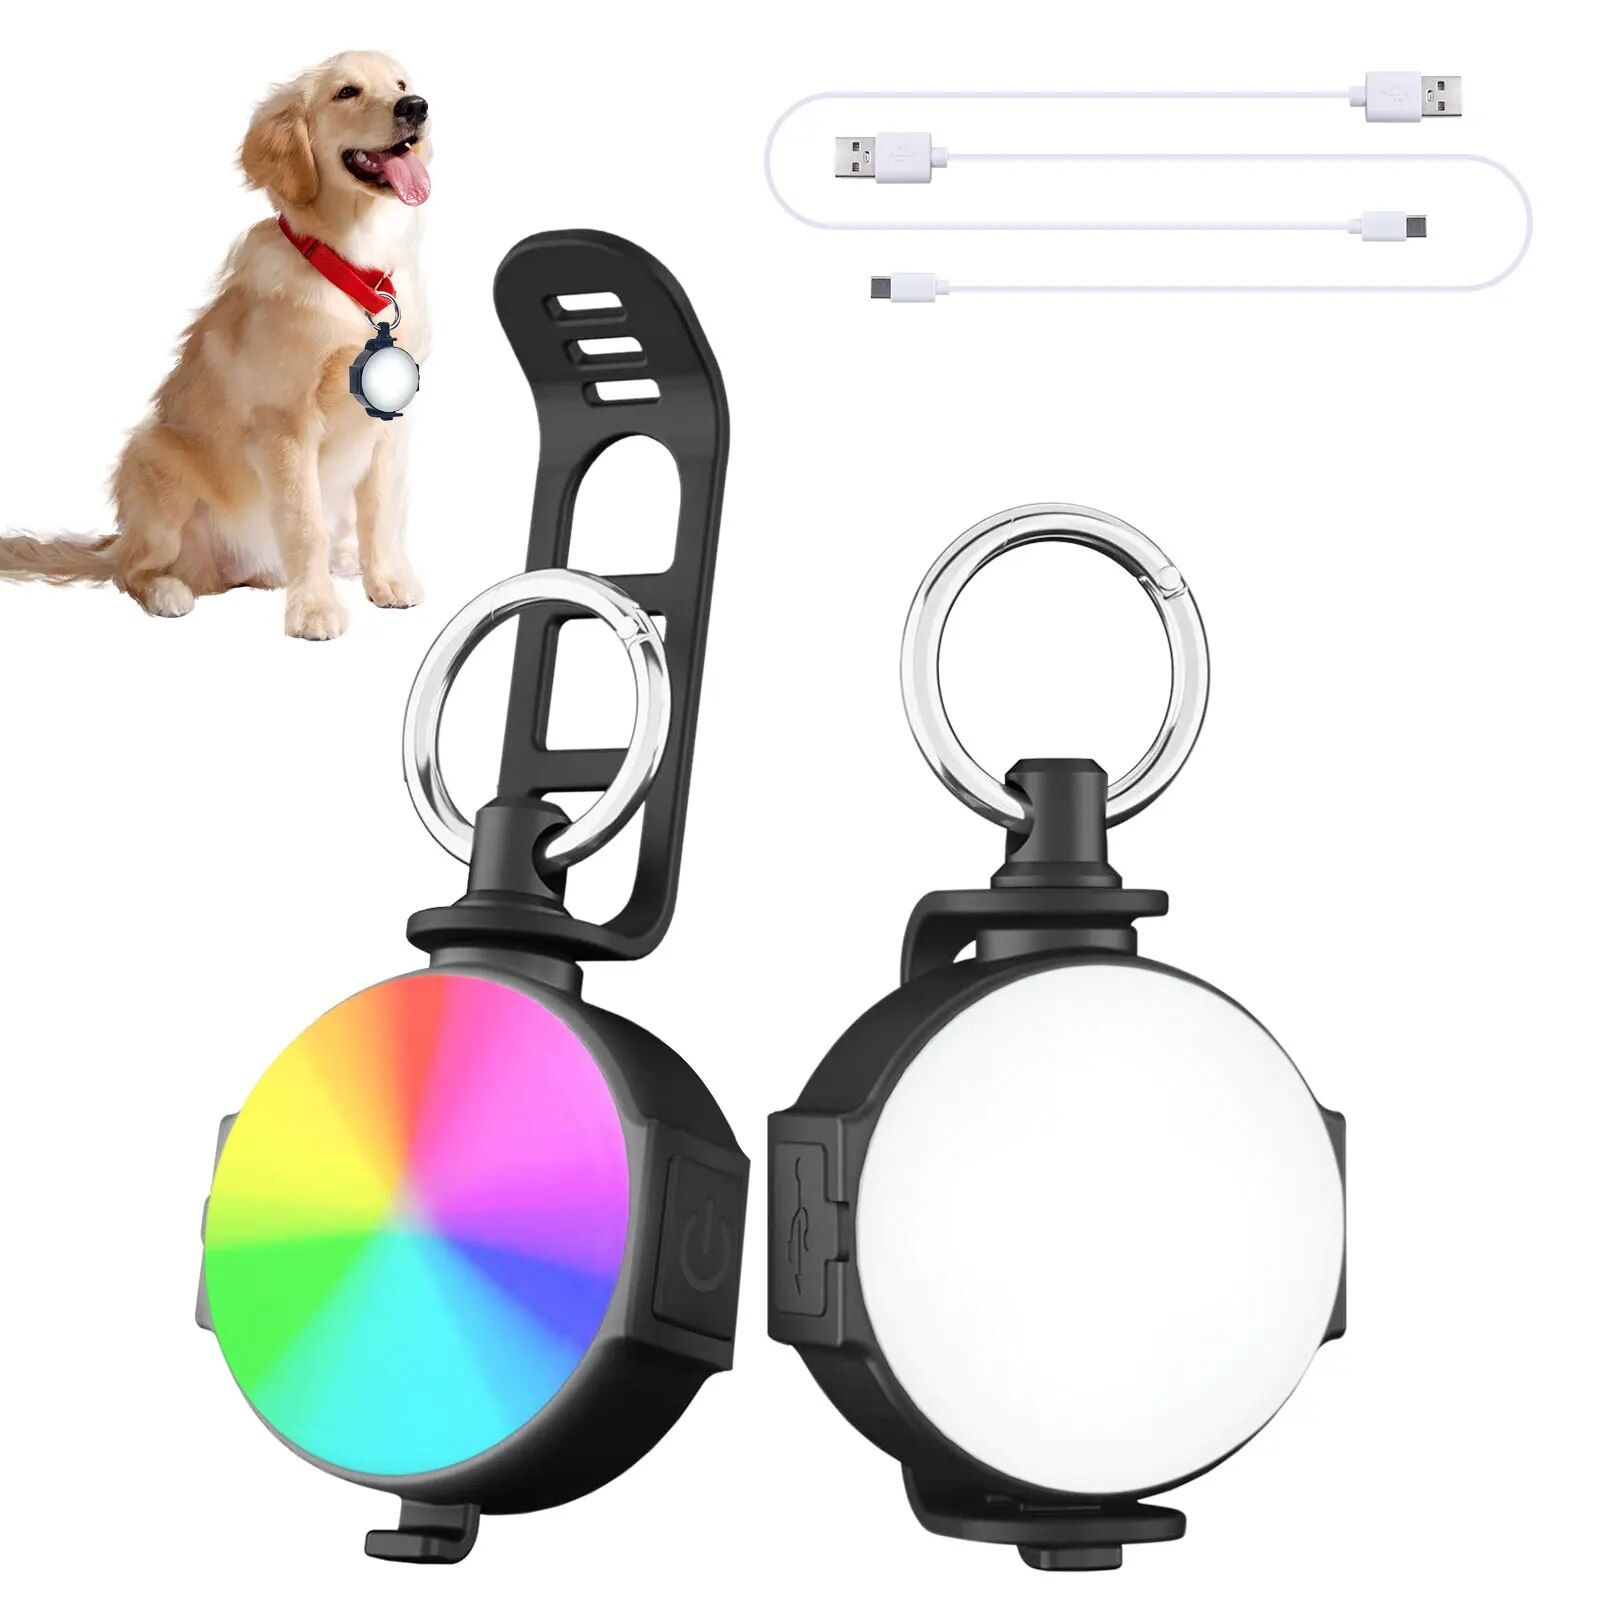 USB Rechargeable LED Pet Safety Light - Multi-Mode Dog & Cat Collar Flashlight for Night Adventures 